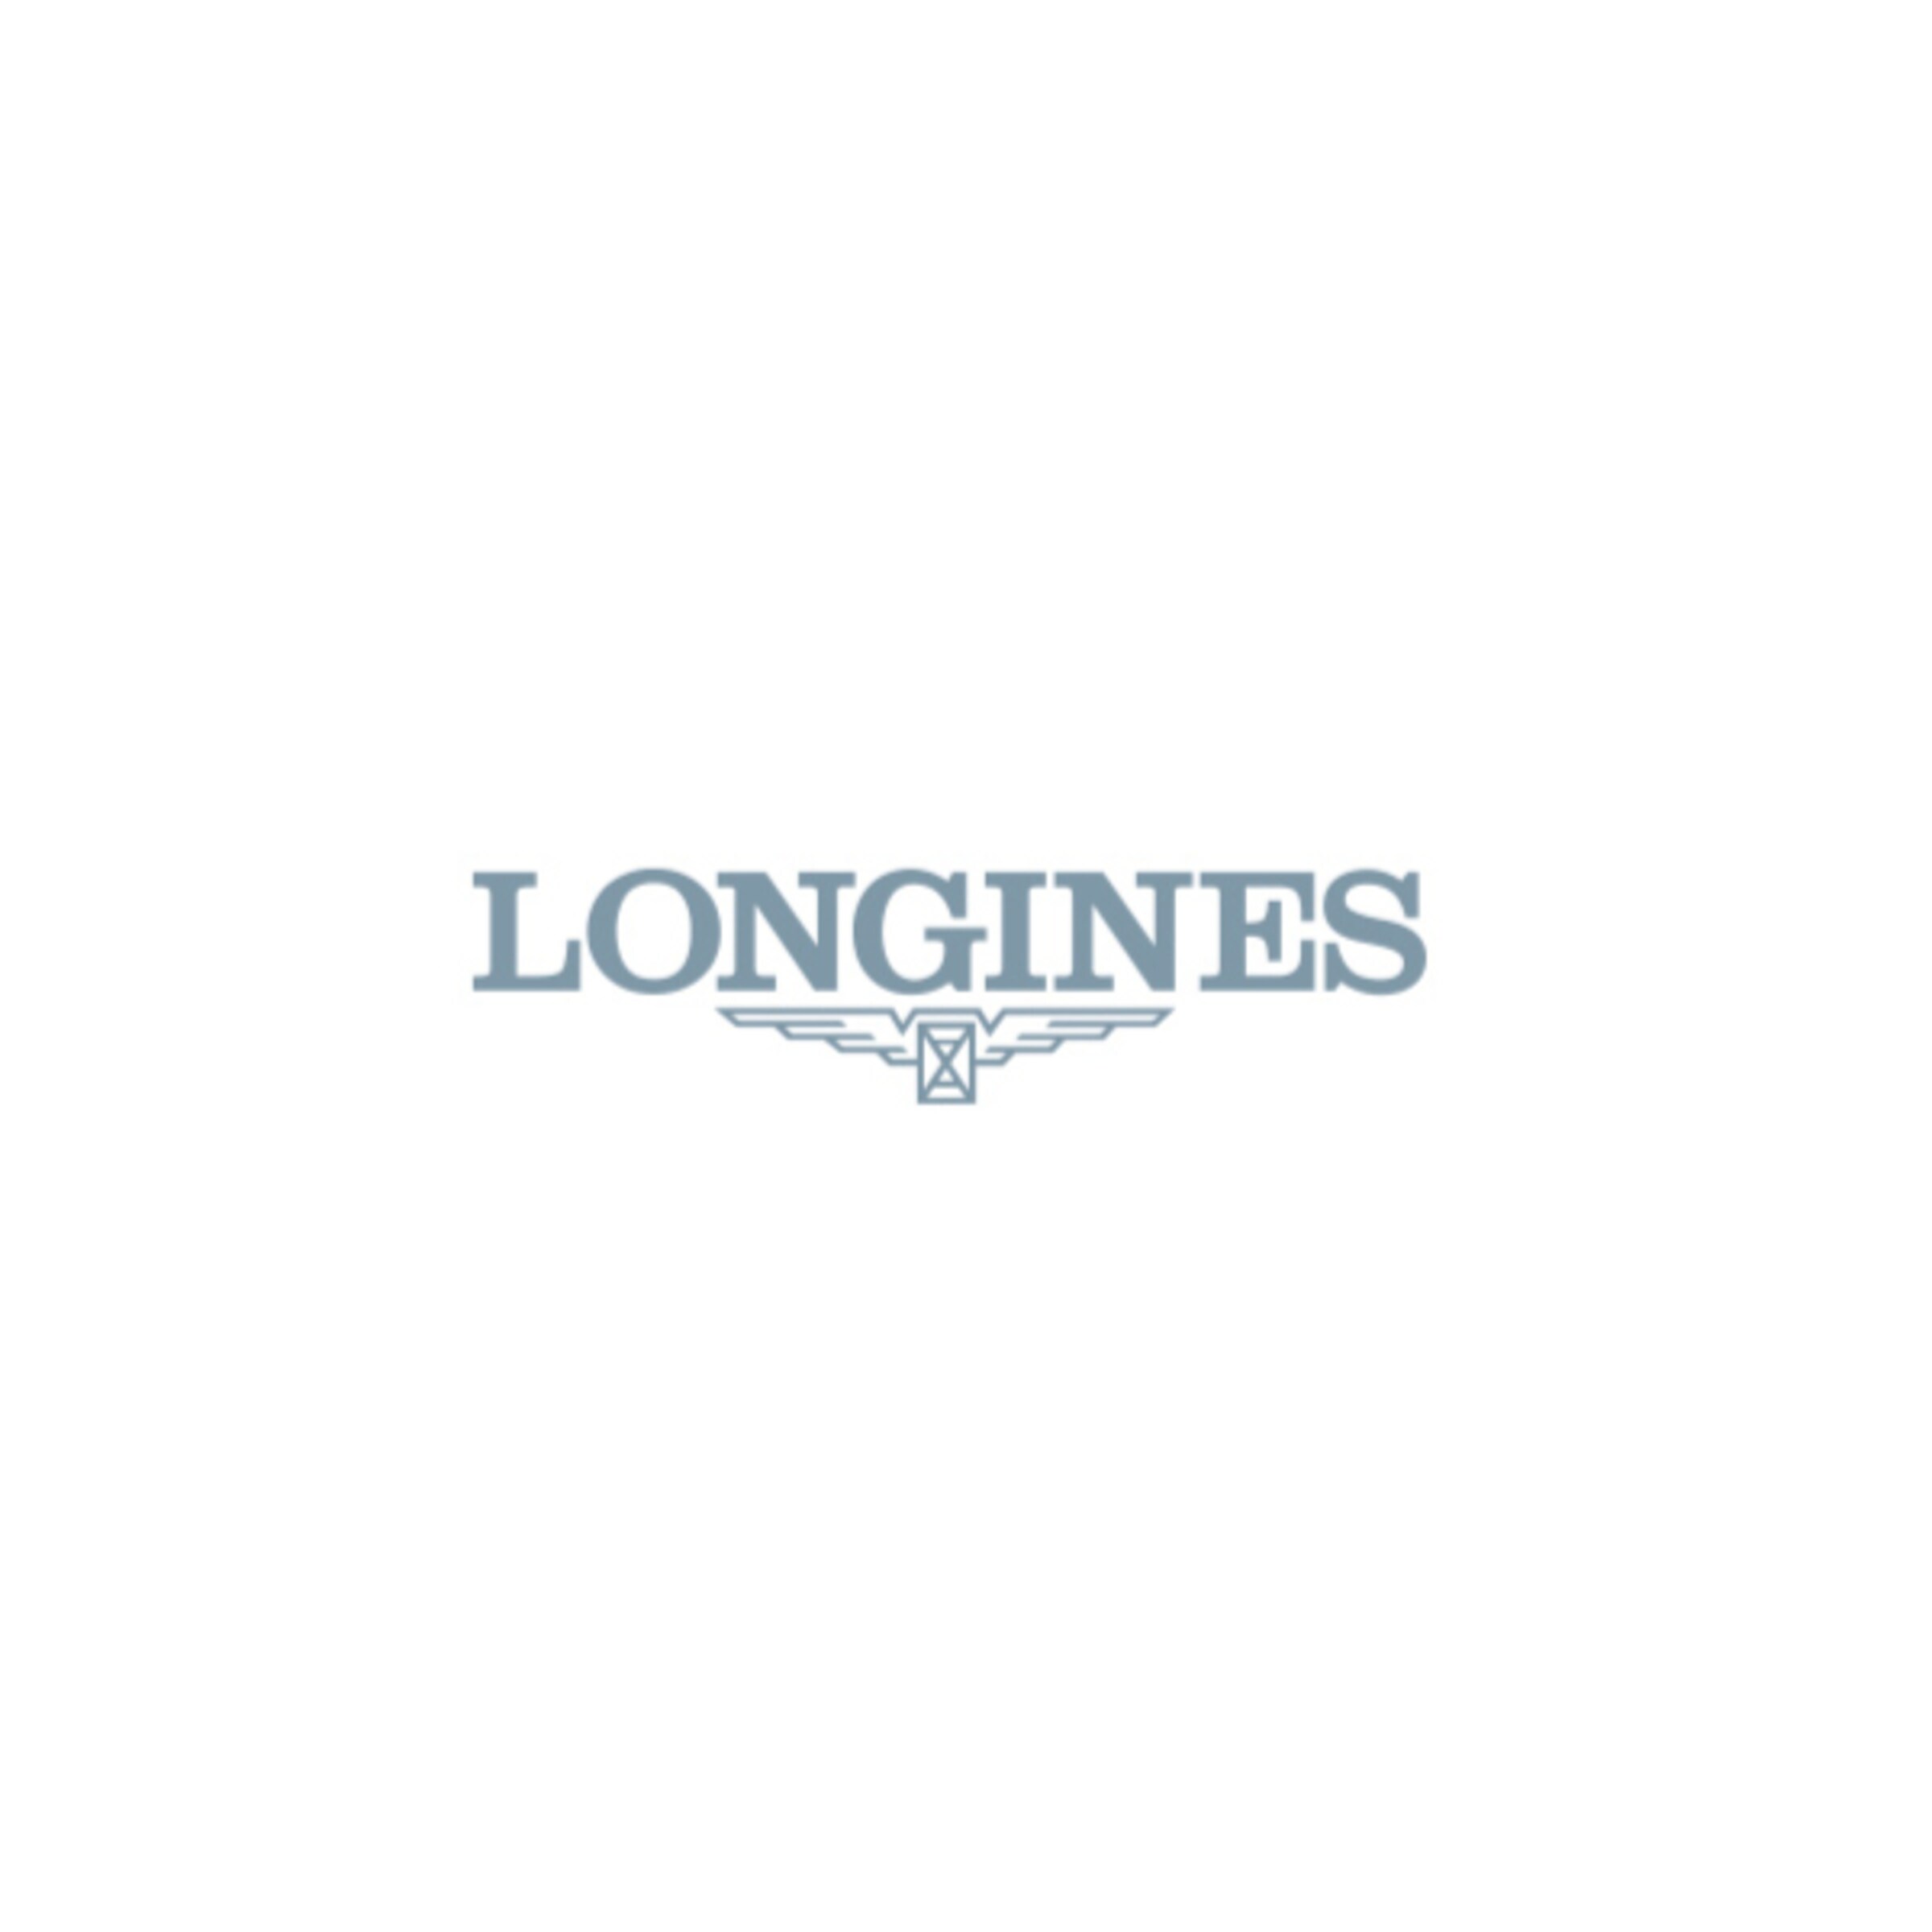 Longines THE LONGINES LEGEND DIVER WATCH Automatic Stainless steel Watch - L3.374.4.50.0